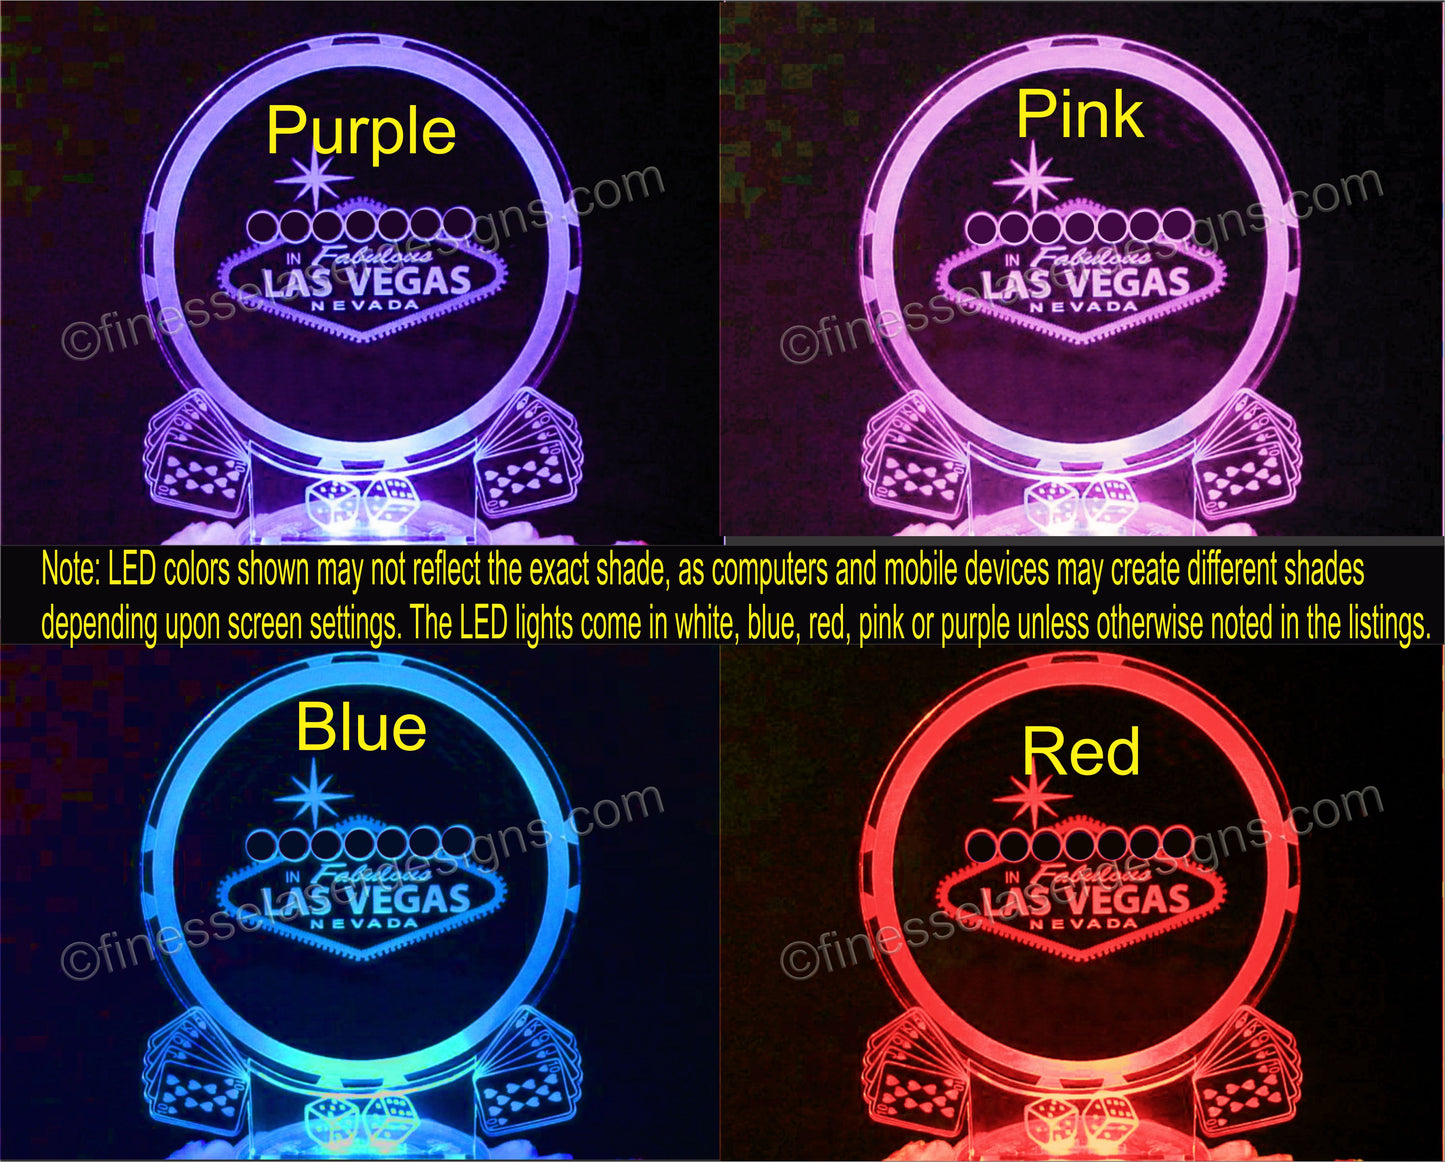 LIghted cake topper with Las Vegas sign design shown in purple, pink, blue and red lighting